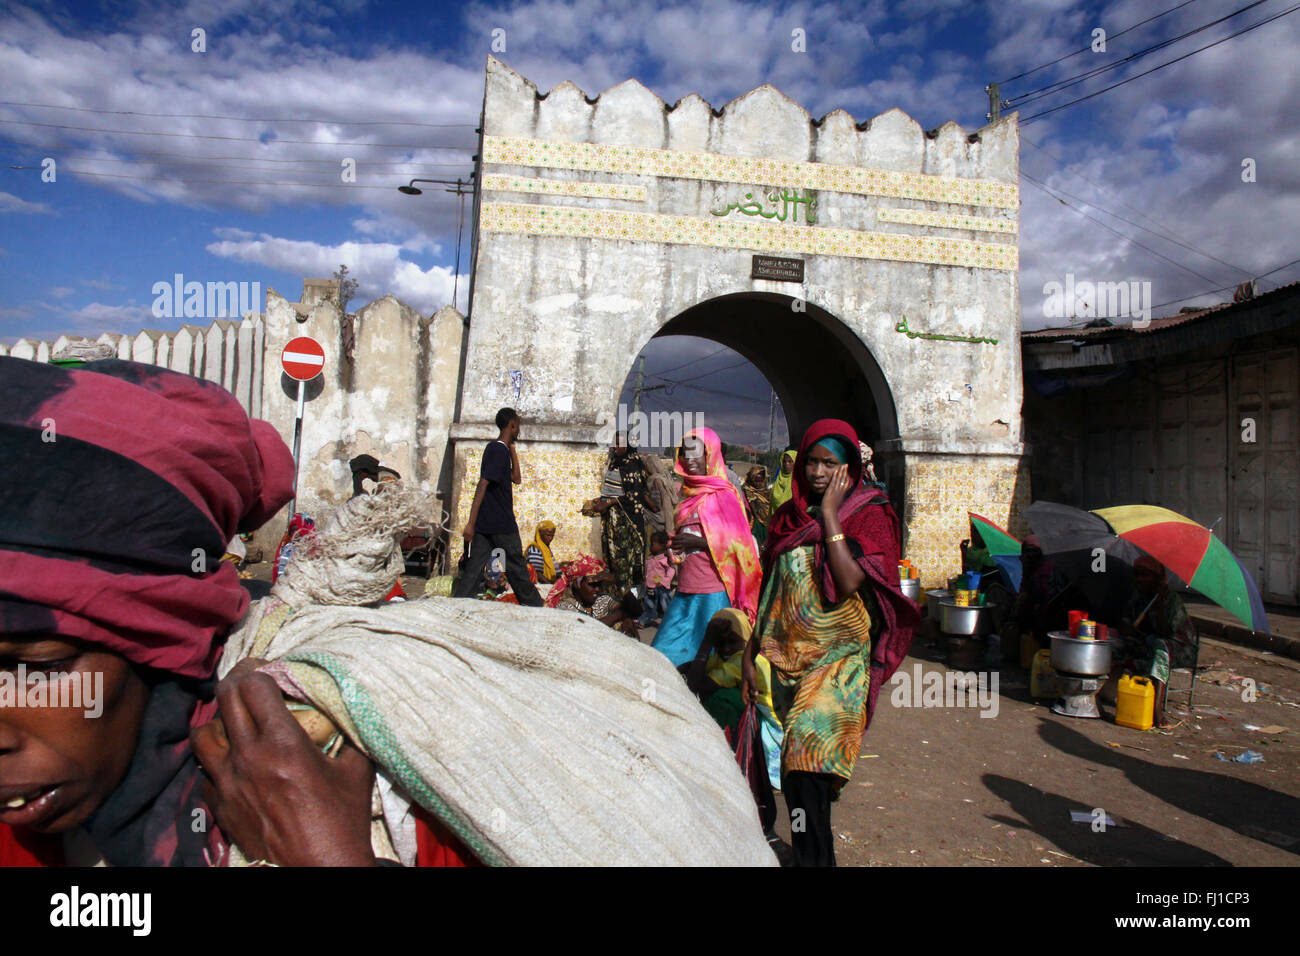 Crowd at the Shoa gate - market area and entrance of old city of Harar , Ethiopia Stock Photo